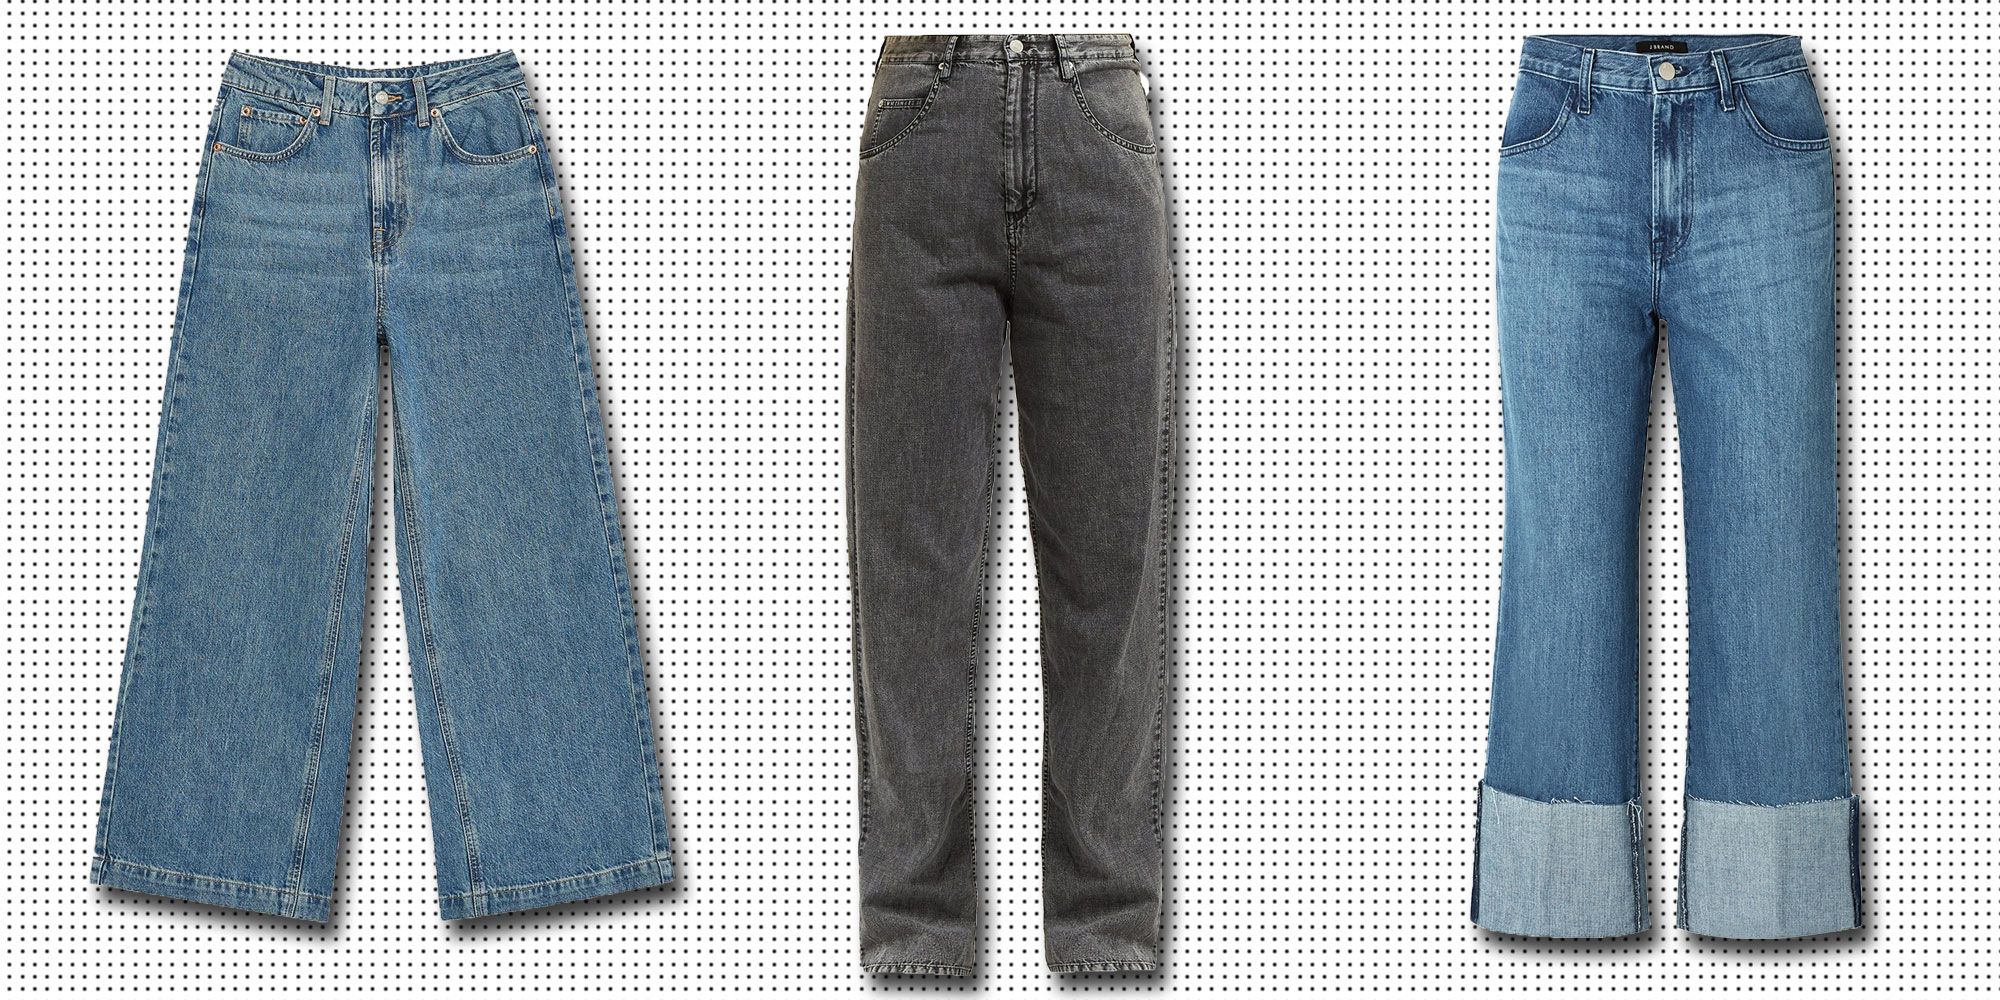 styles for jeans material